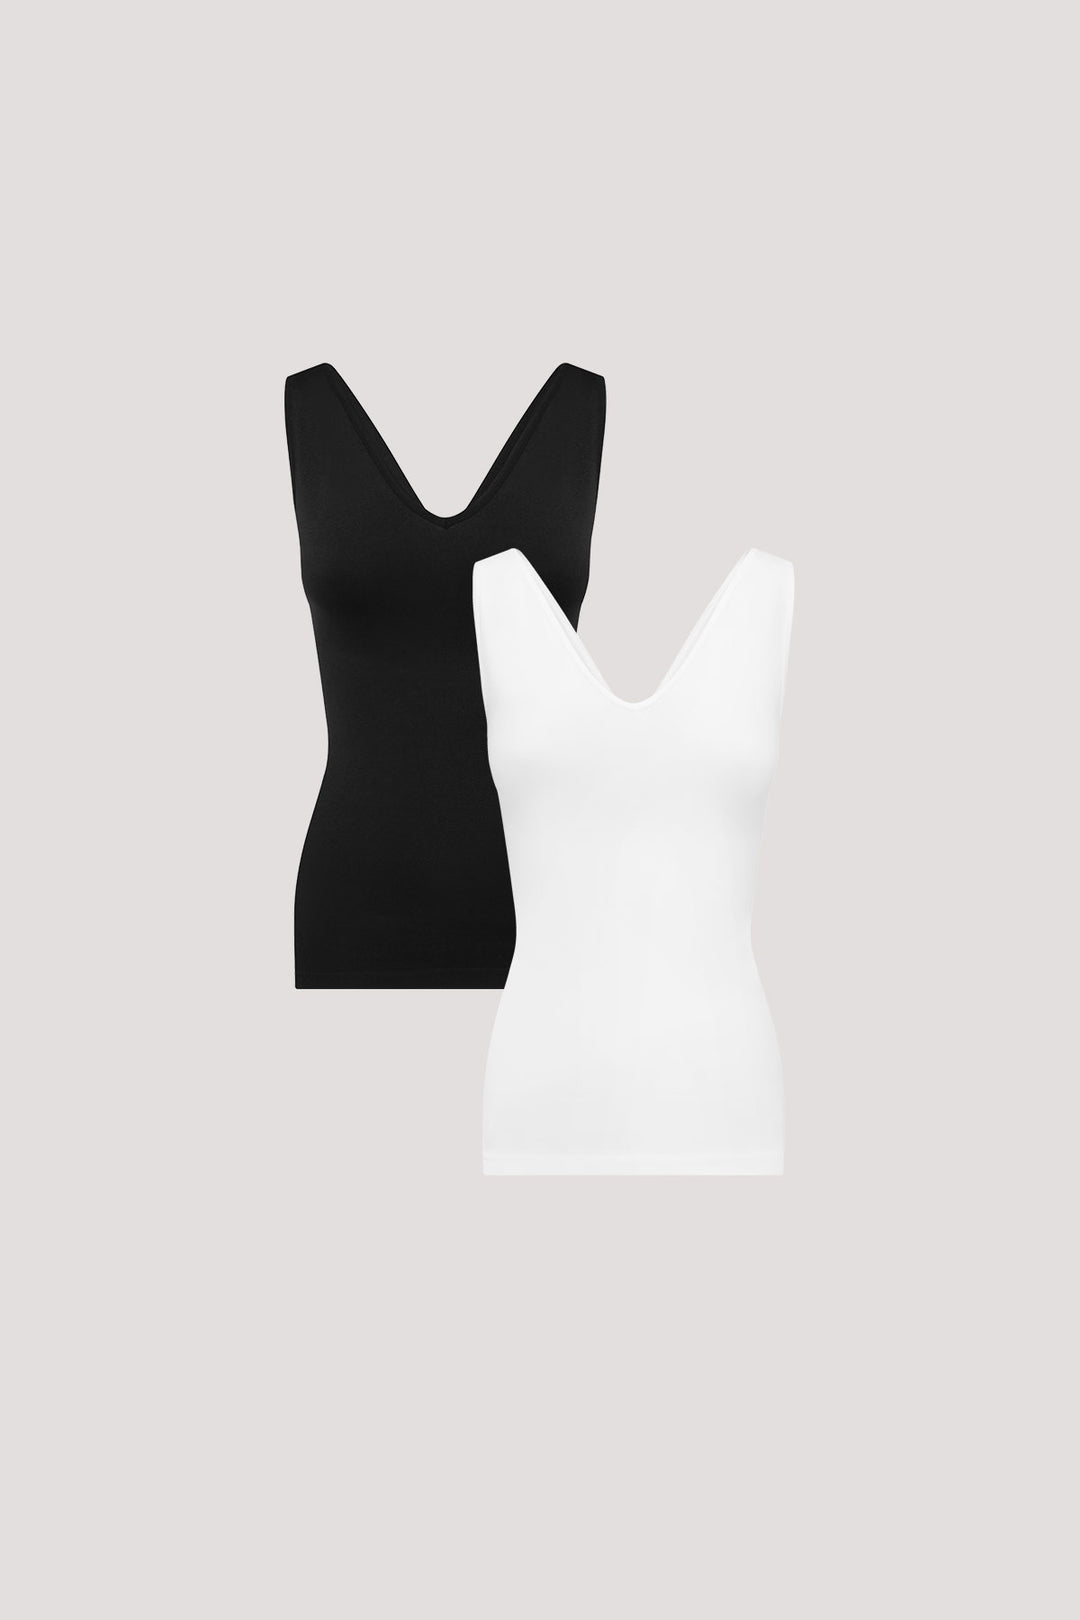 Women's comfortable Reversible Neckline, shaping and firming cami | Camyz Shapewear Smoothing Tank I Bella Bodies Australia I Black and White